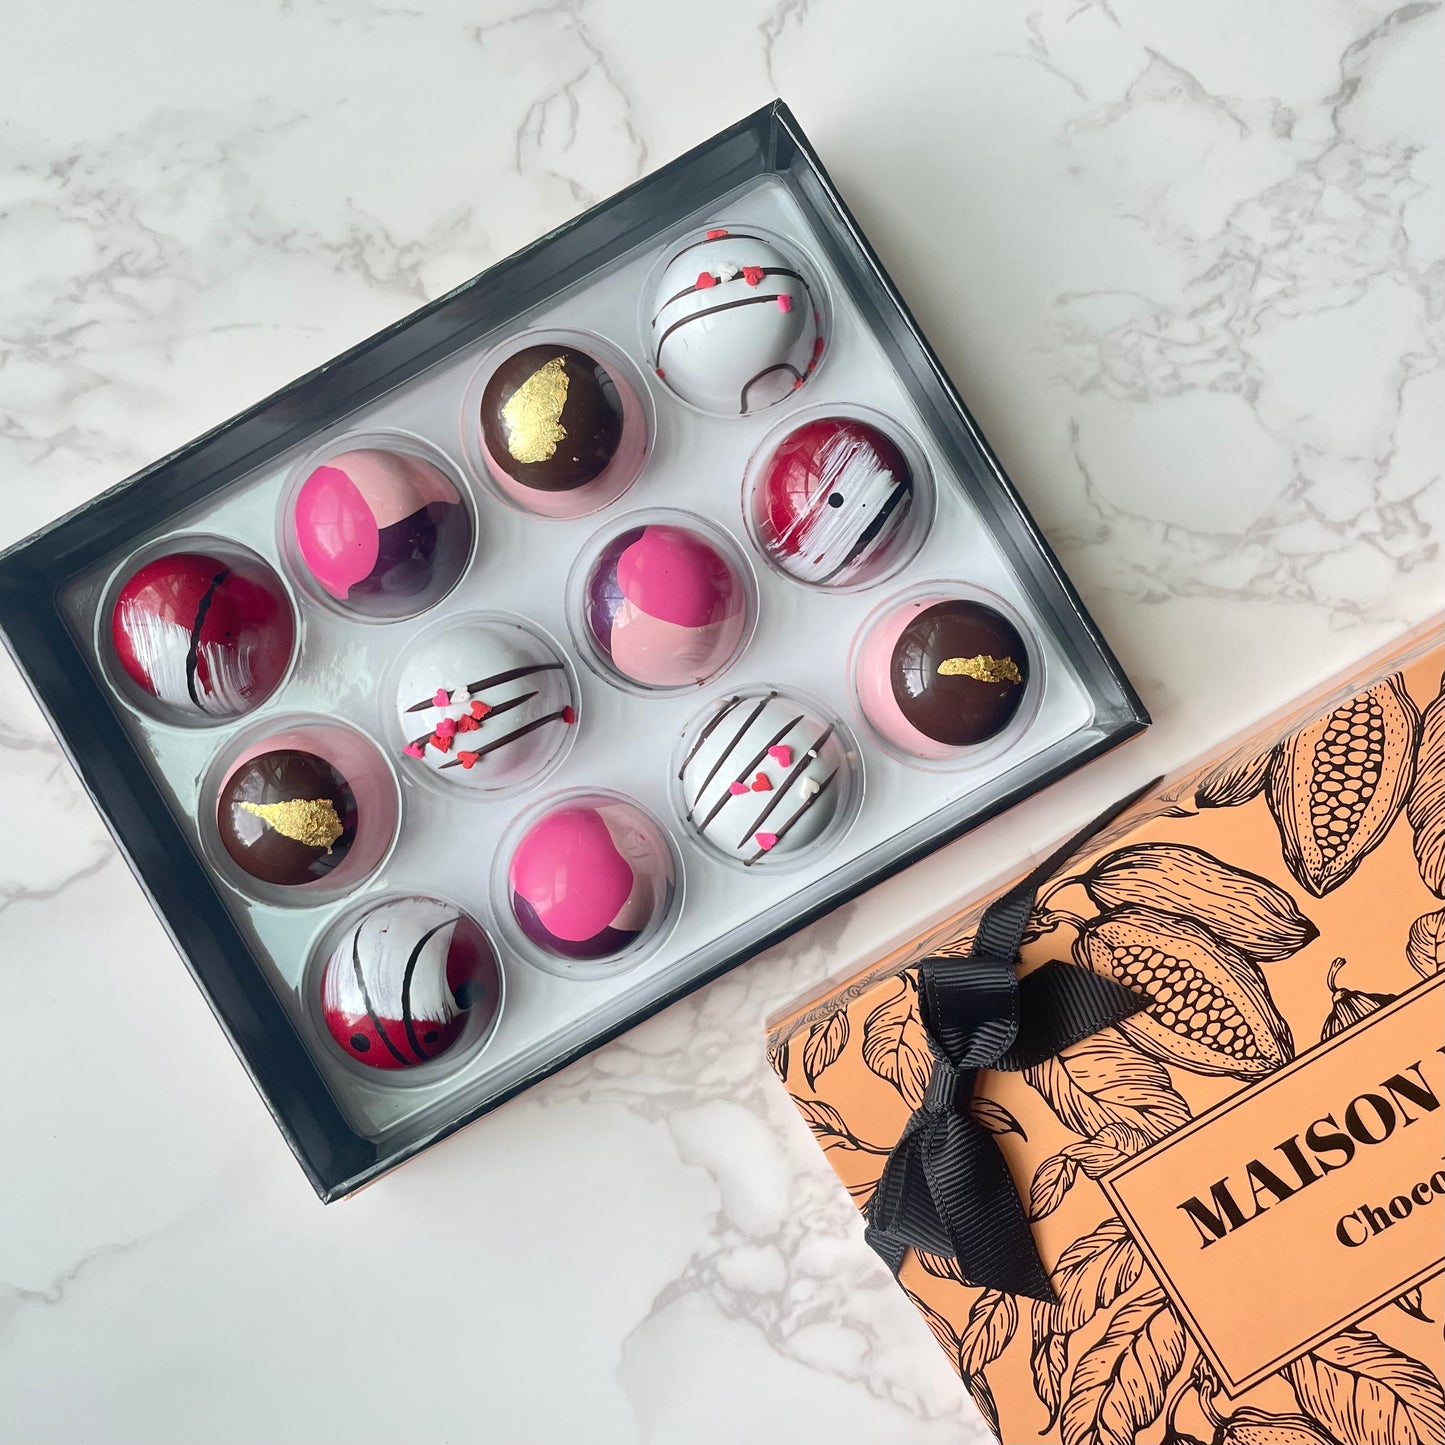 Seasonal availability only! "Chic and sexy XOXO" 64% Dark chocolate Bonbon collection.